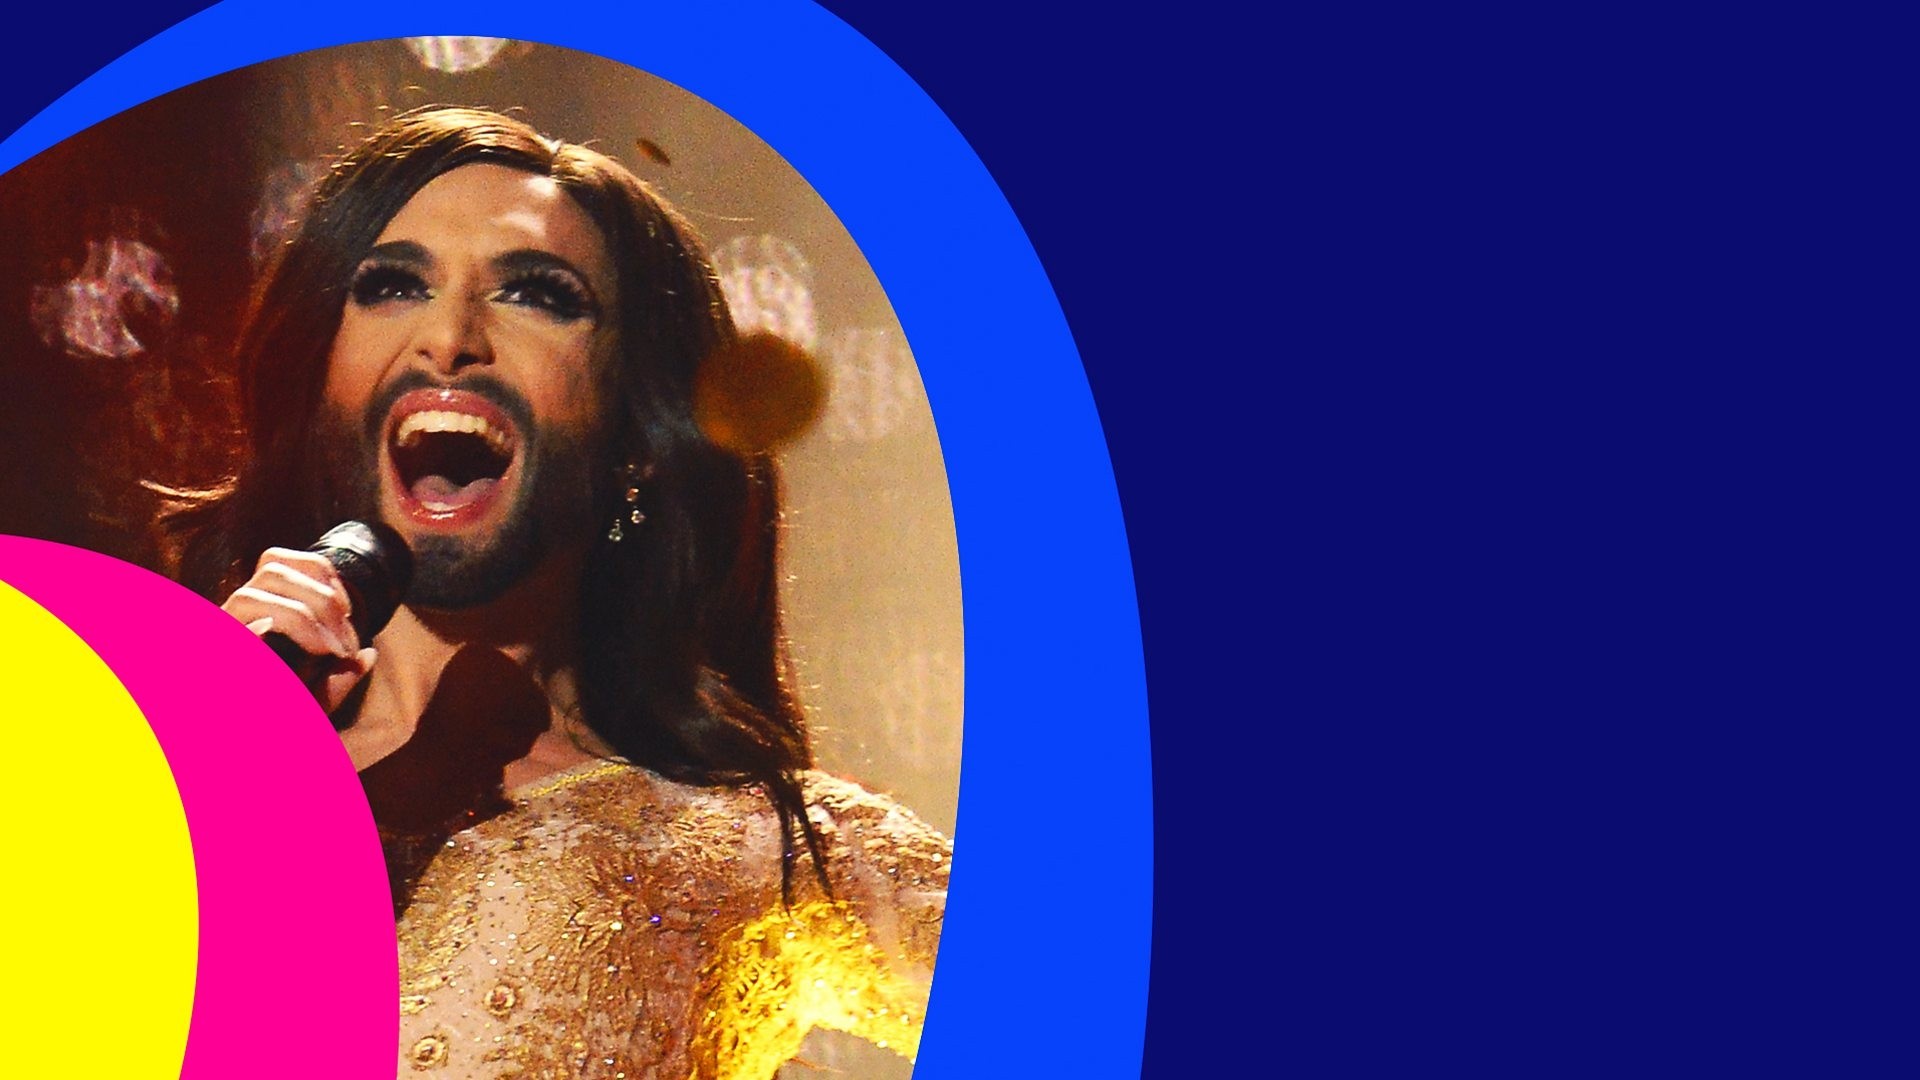 Eurovision: 9 must-see moments - BBC iPlayer